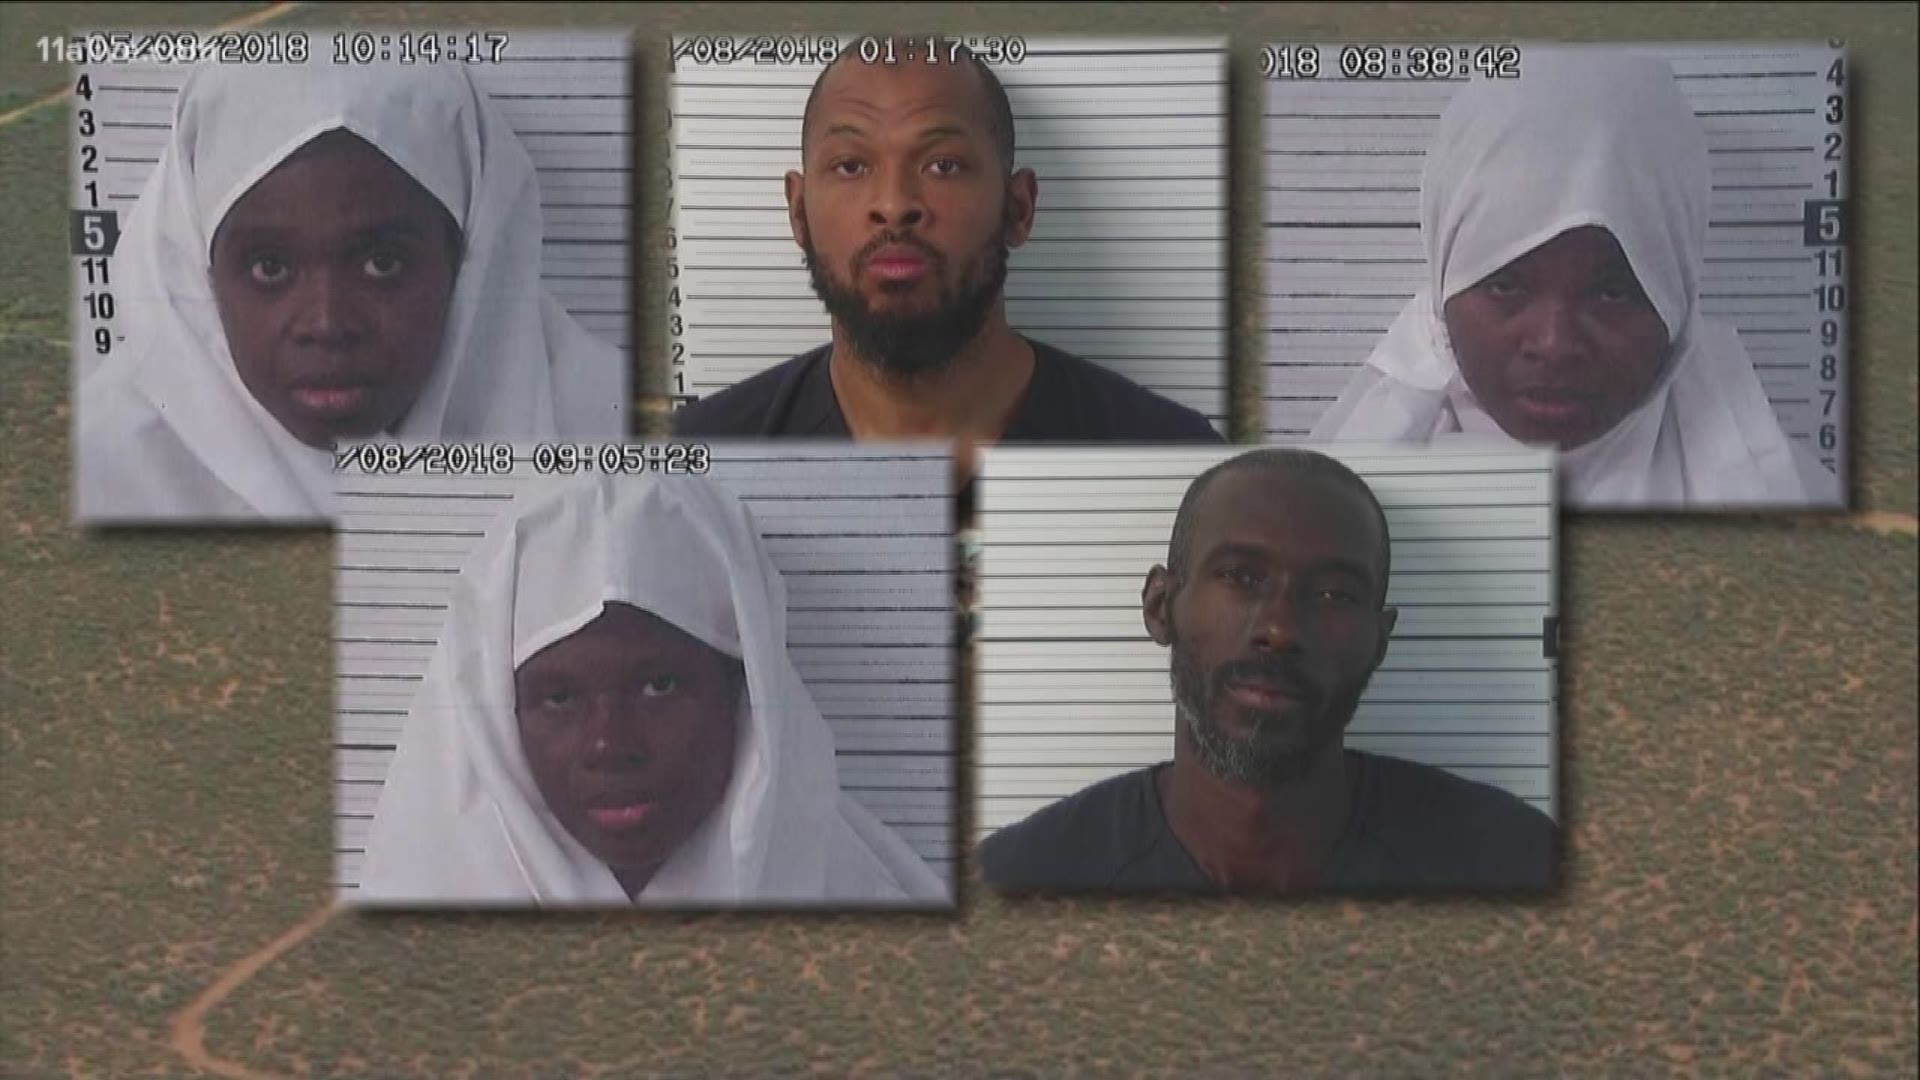 Federal investigators said the five people were running a terrorist training camp in the New Mexican desert.